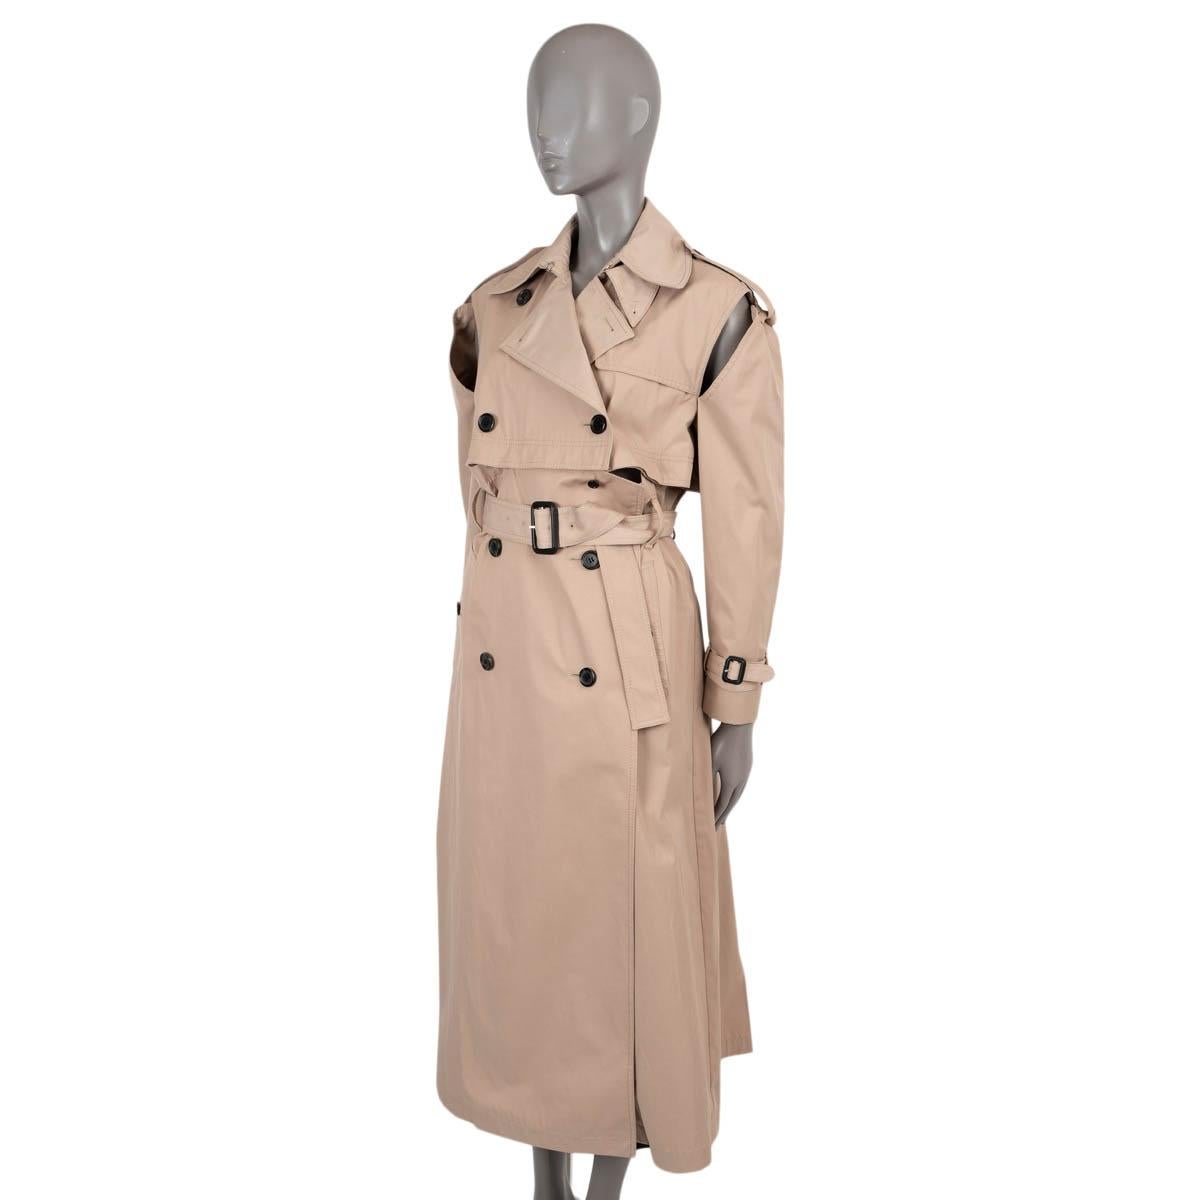 100% authentic Valentino convertible trench coat in beige polyester (62%) and cotton (38%). Bottom unbuttons and converts to cropped jacket. Features partially detached sleeves, epaulettes, matching belt and belts at cuffs. Closes with buttons and